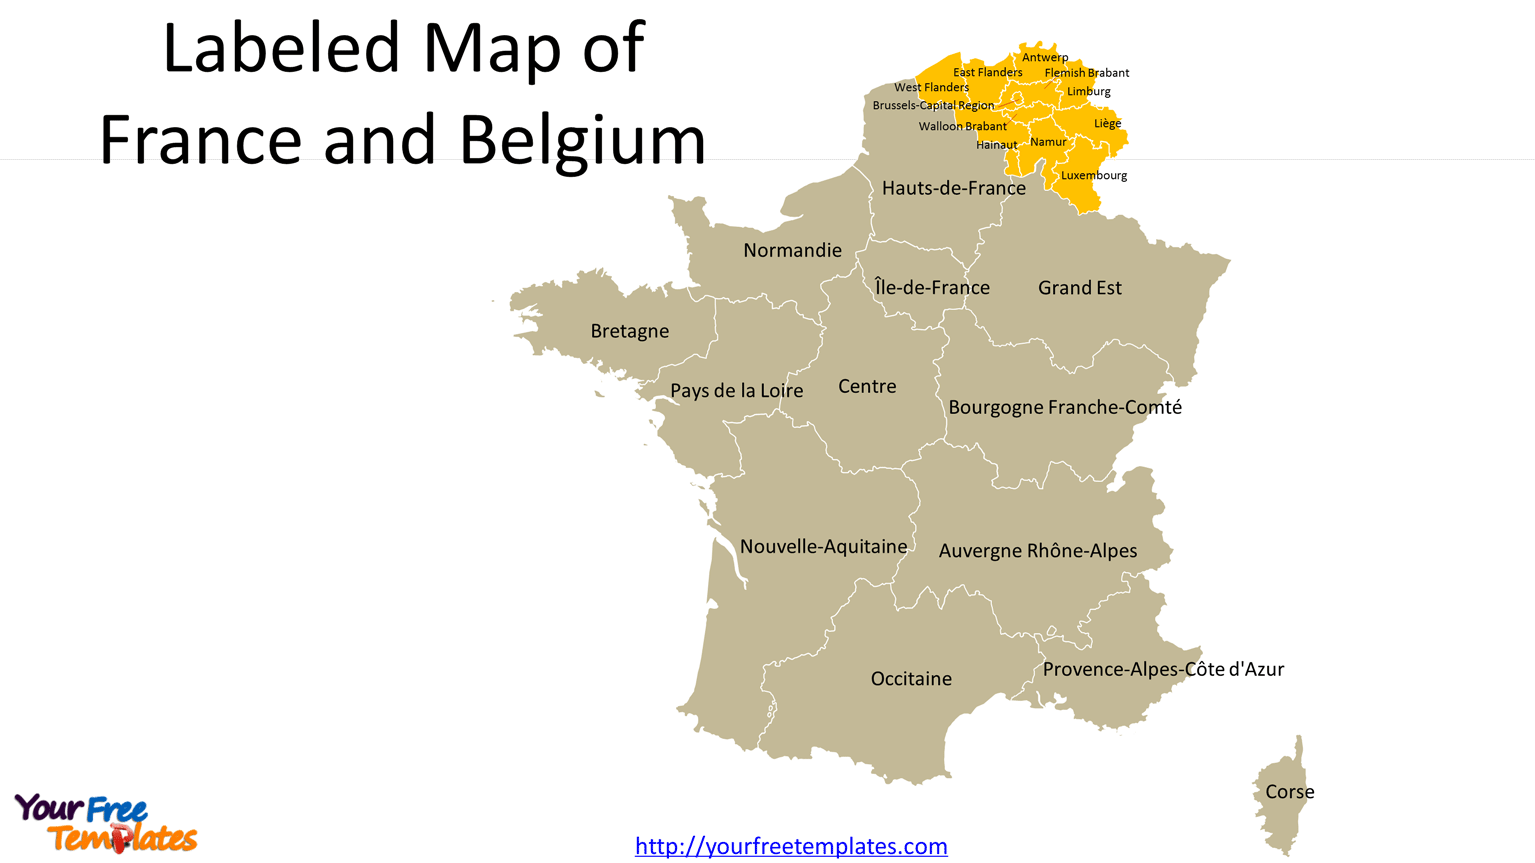 Outline-Map-of-France-and-Belgium